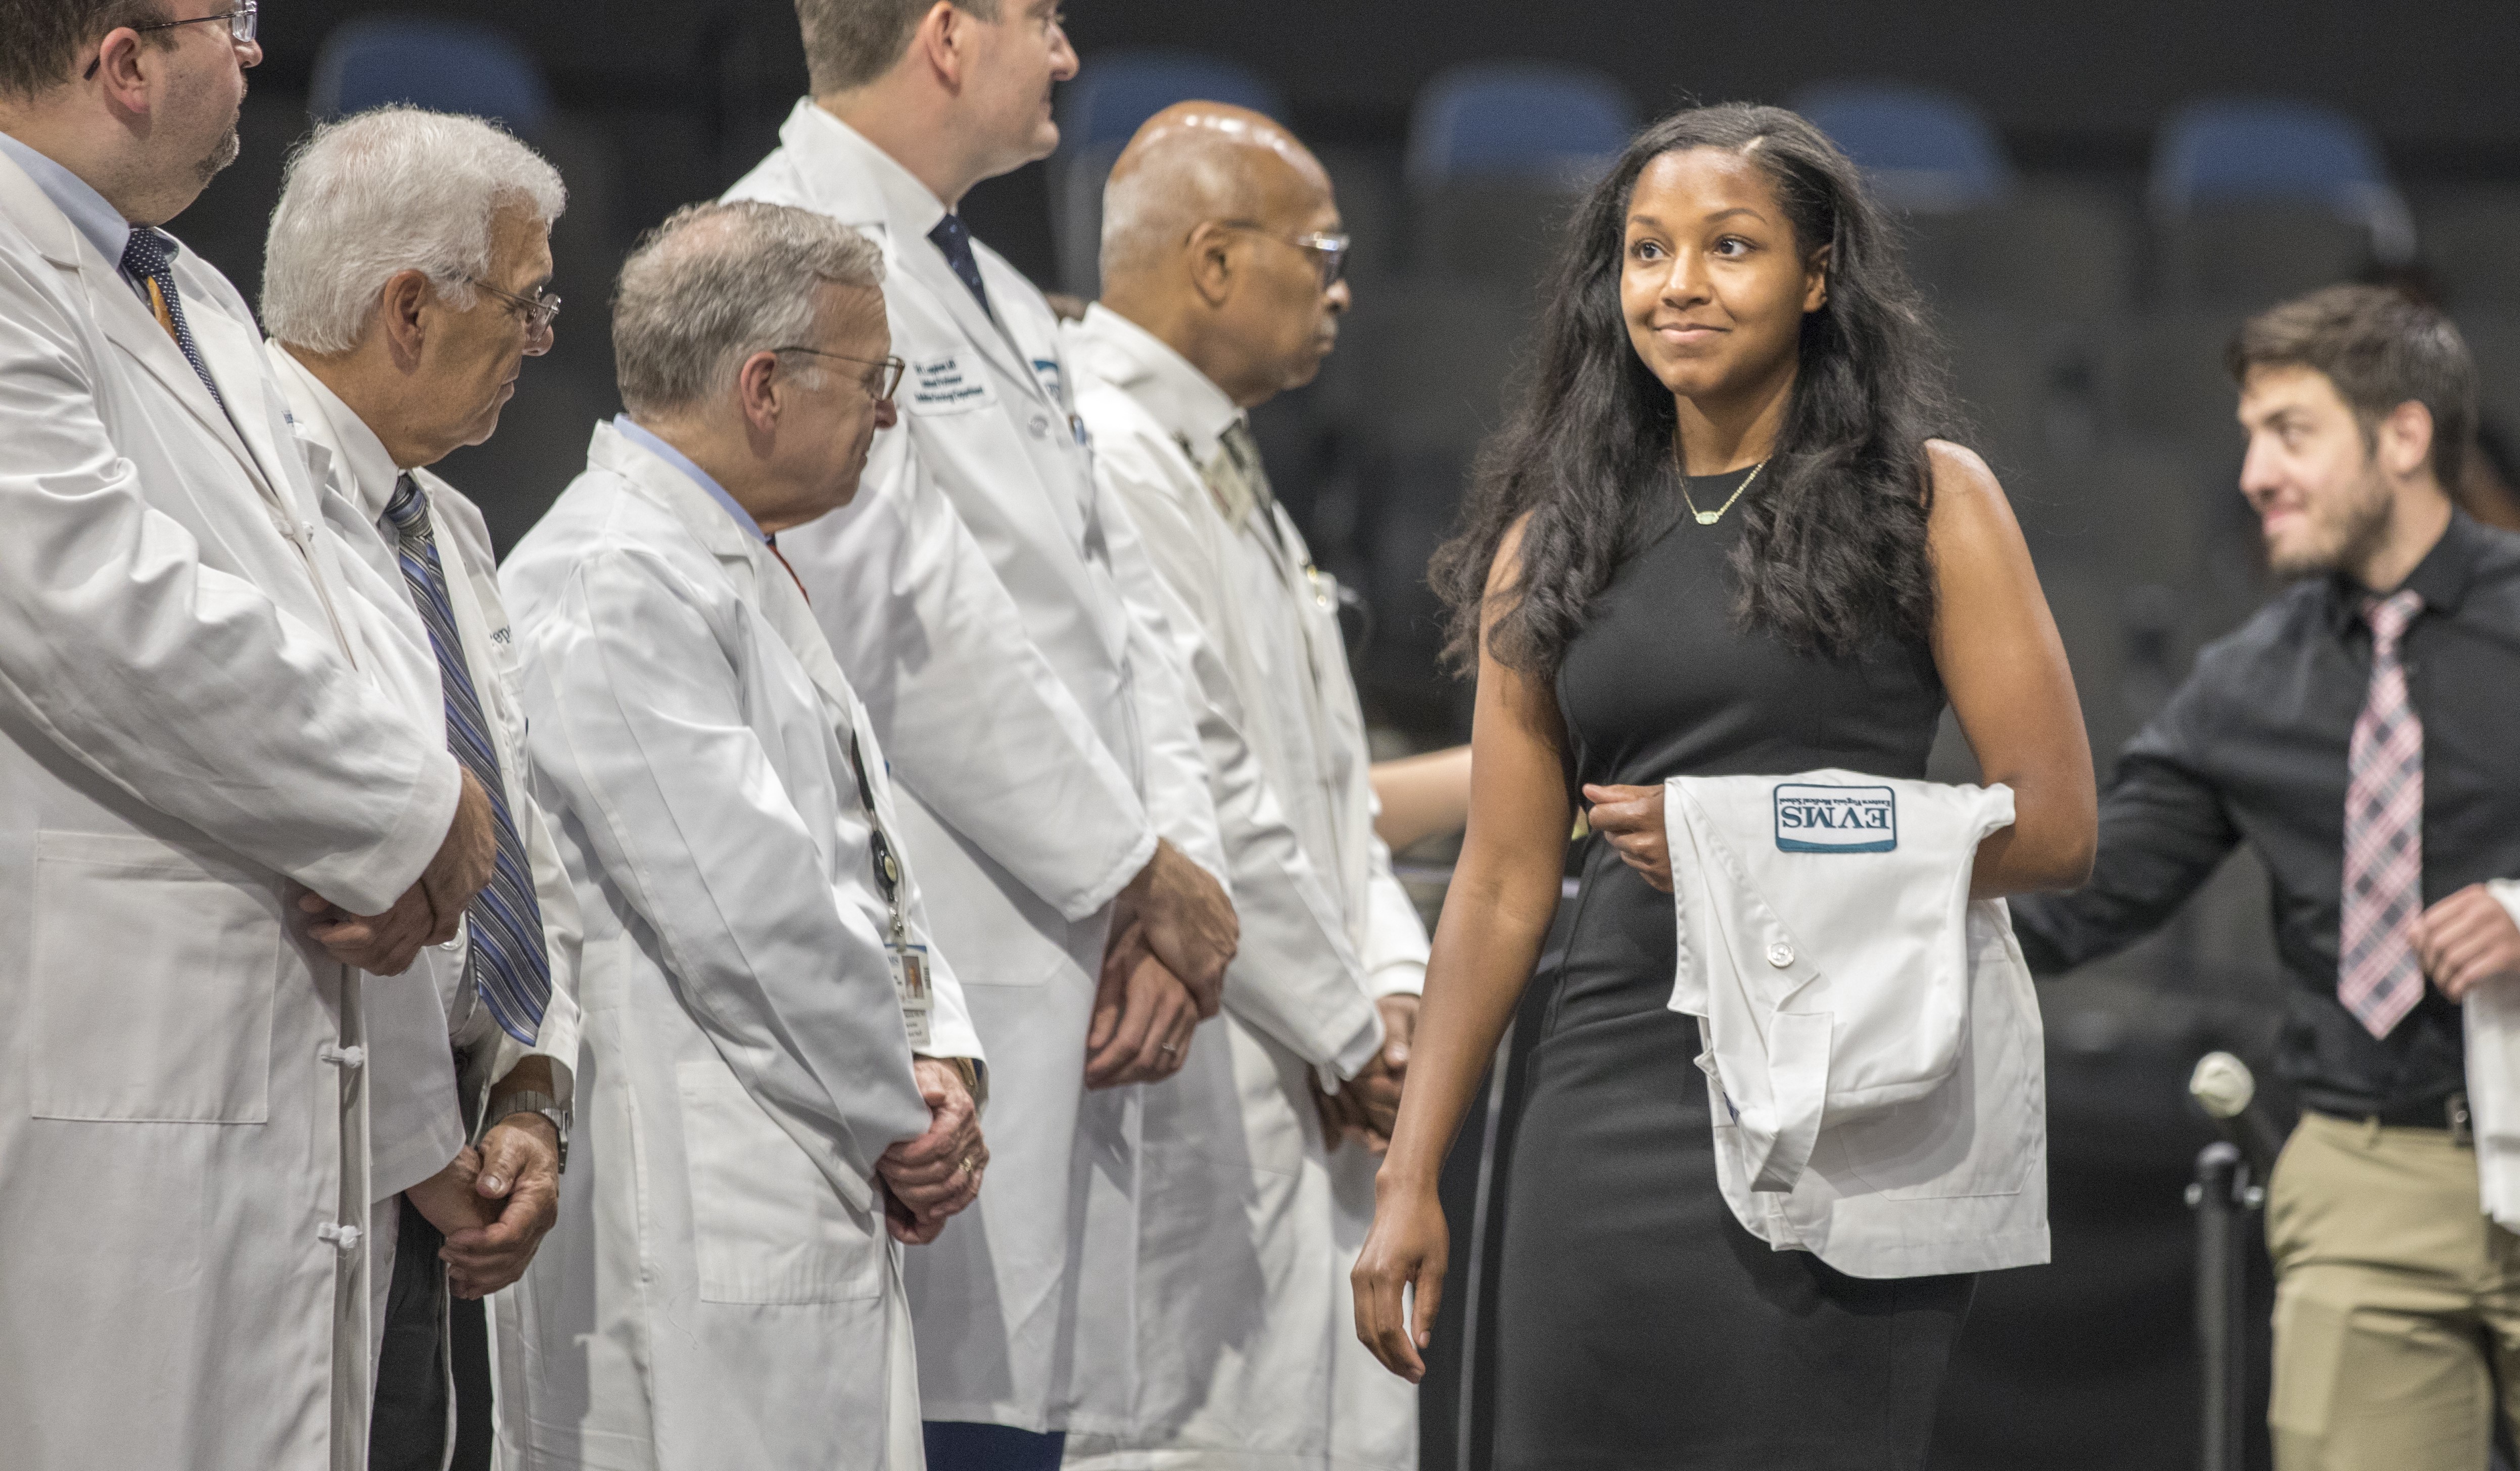 An EMVS student looks proud while walking across the stage during the 2019 MD White Coat Ceremony